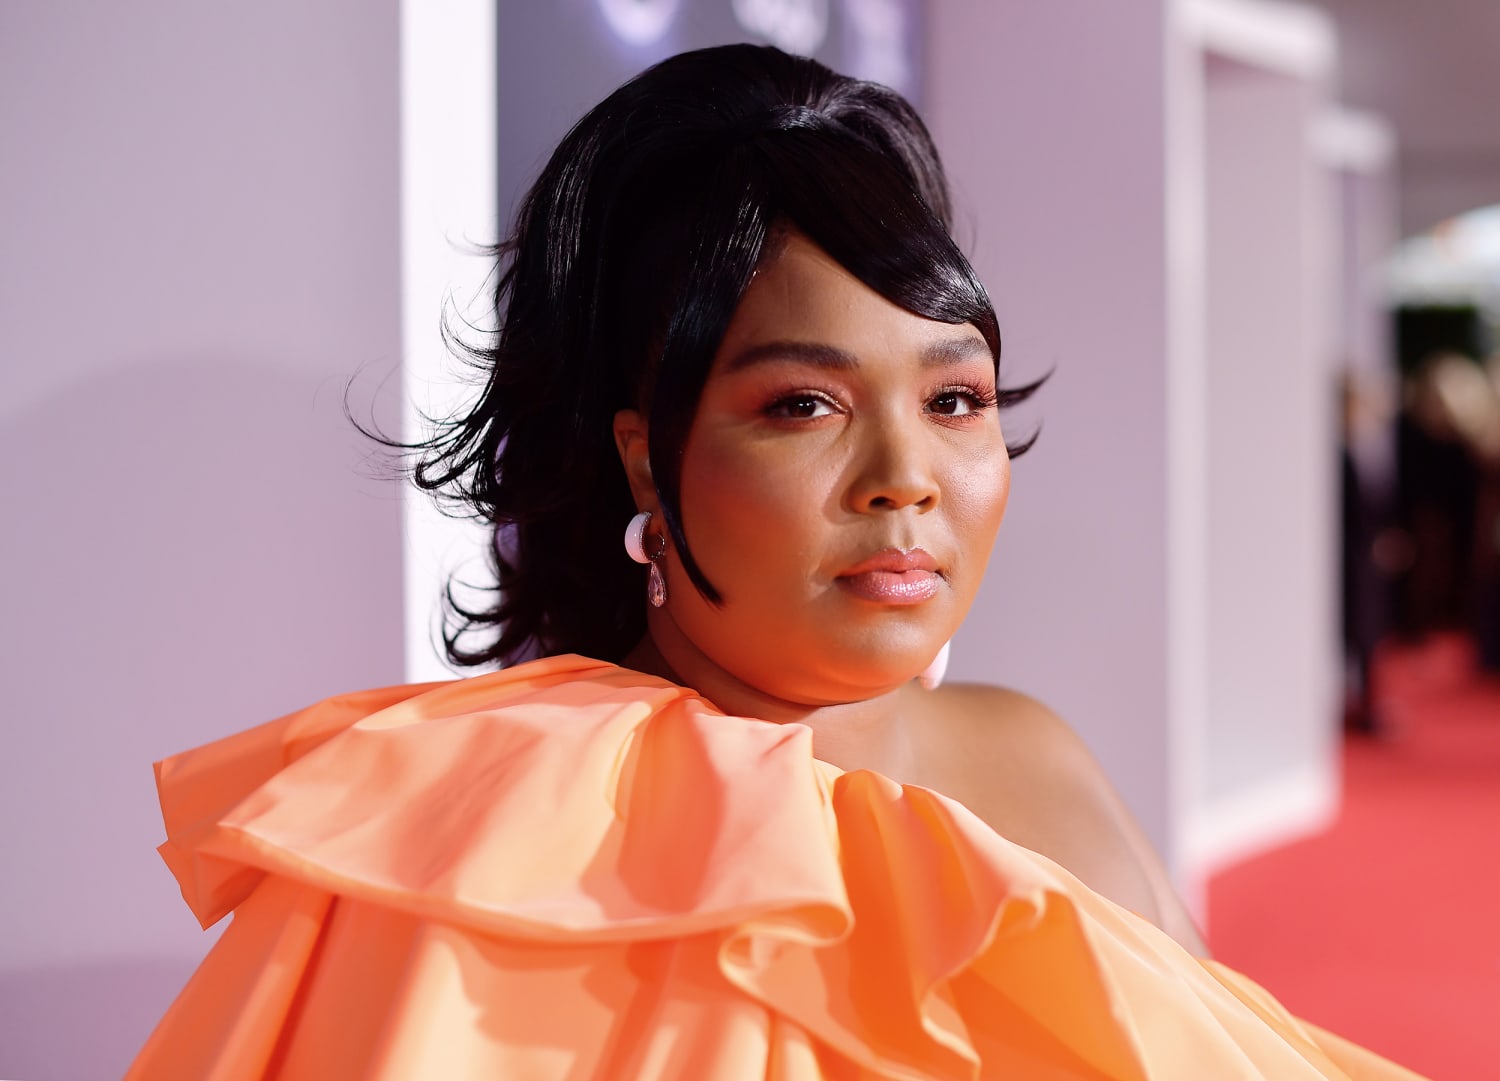 Lizzo sued over sexual harassment and hostile work environment allegations pic